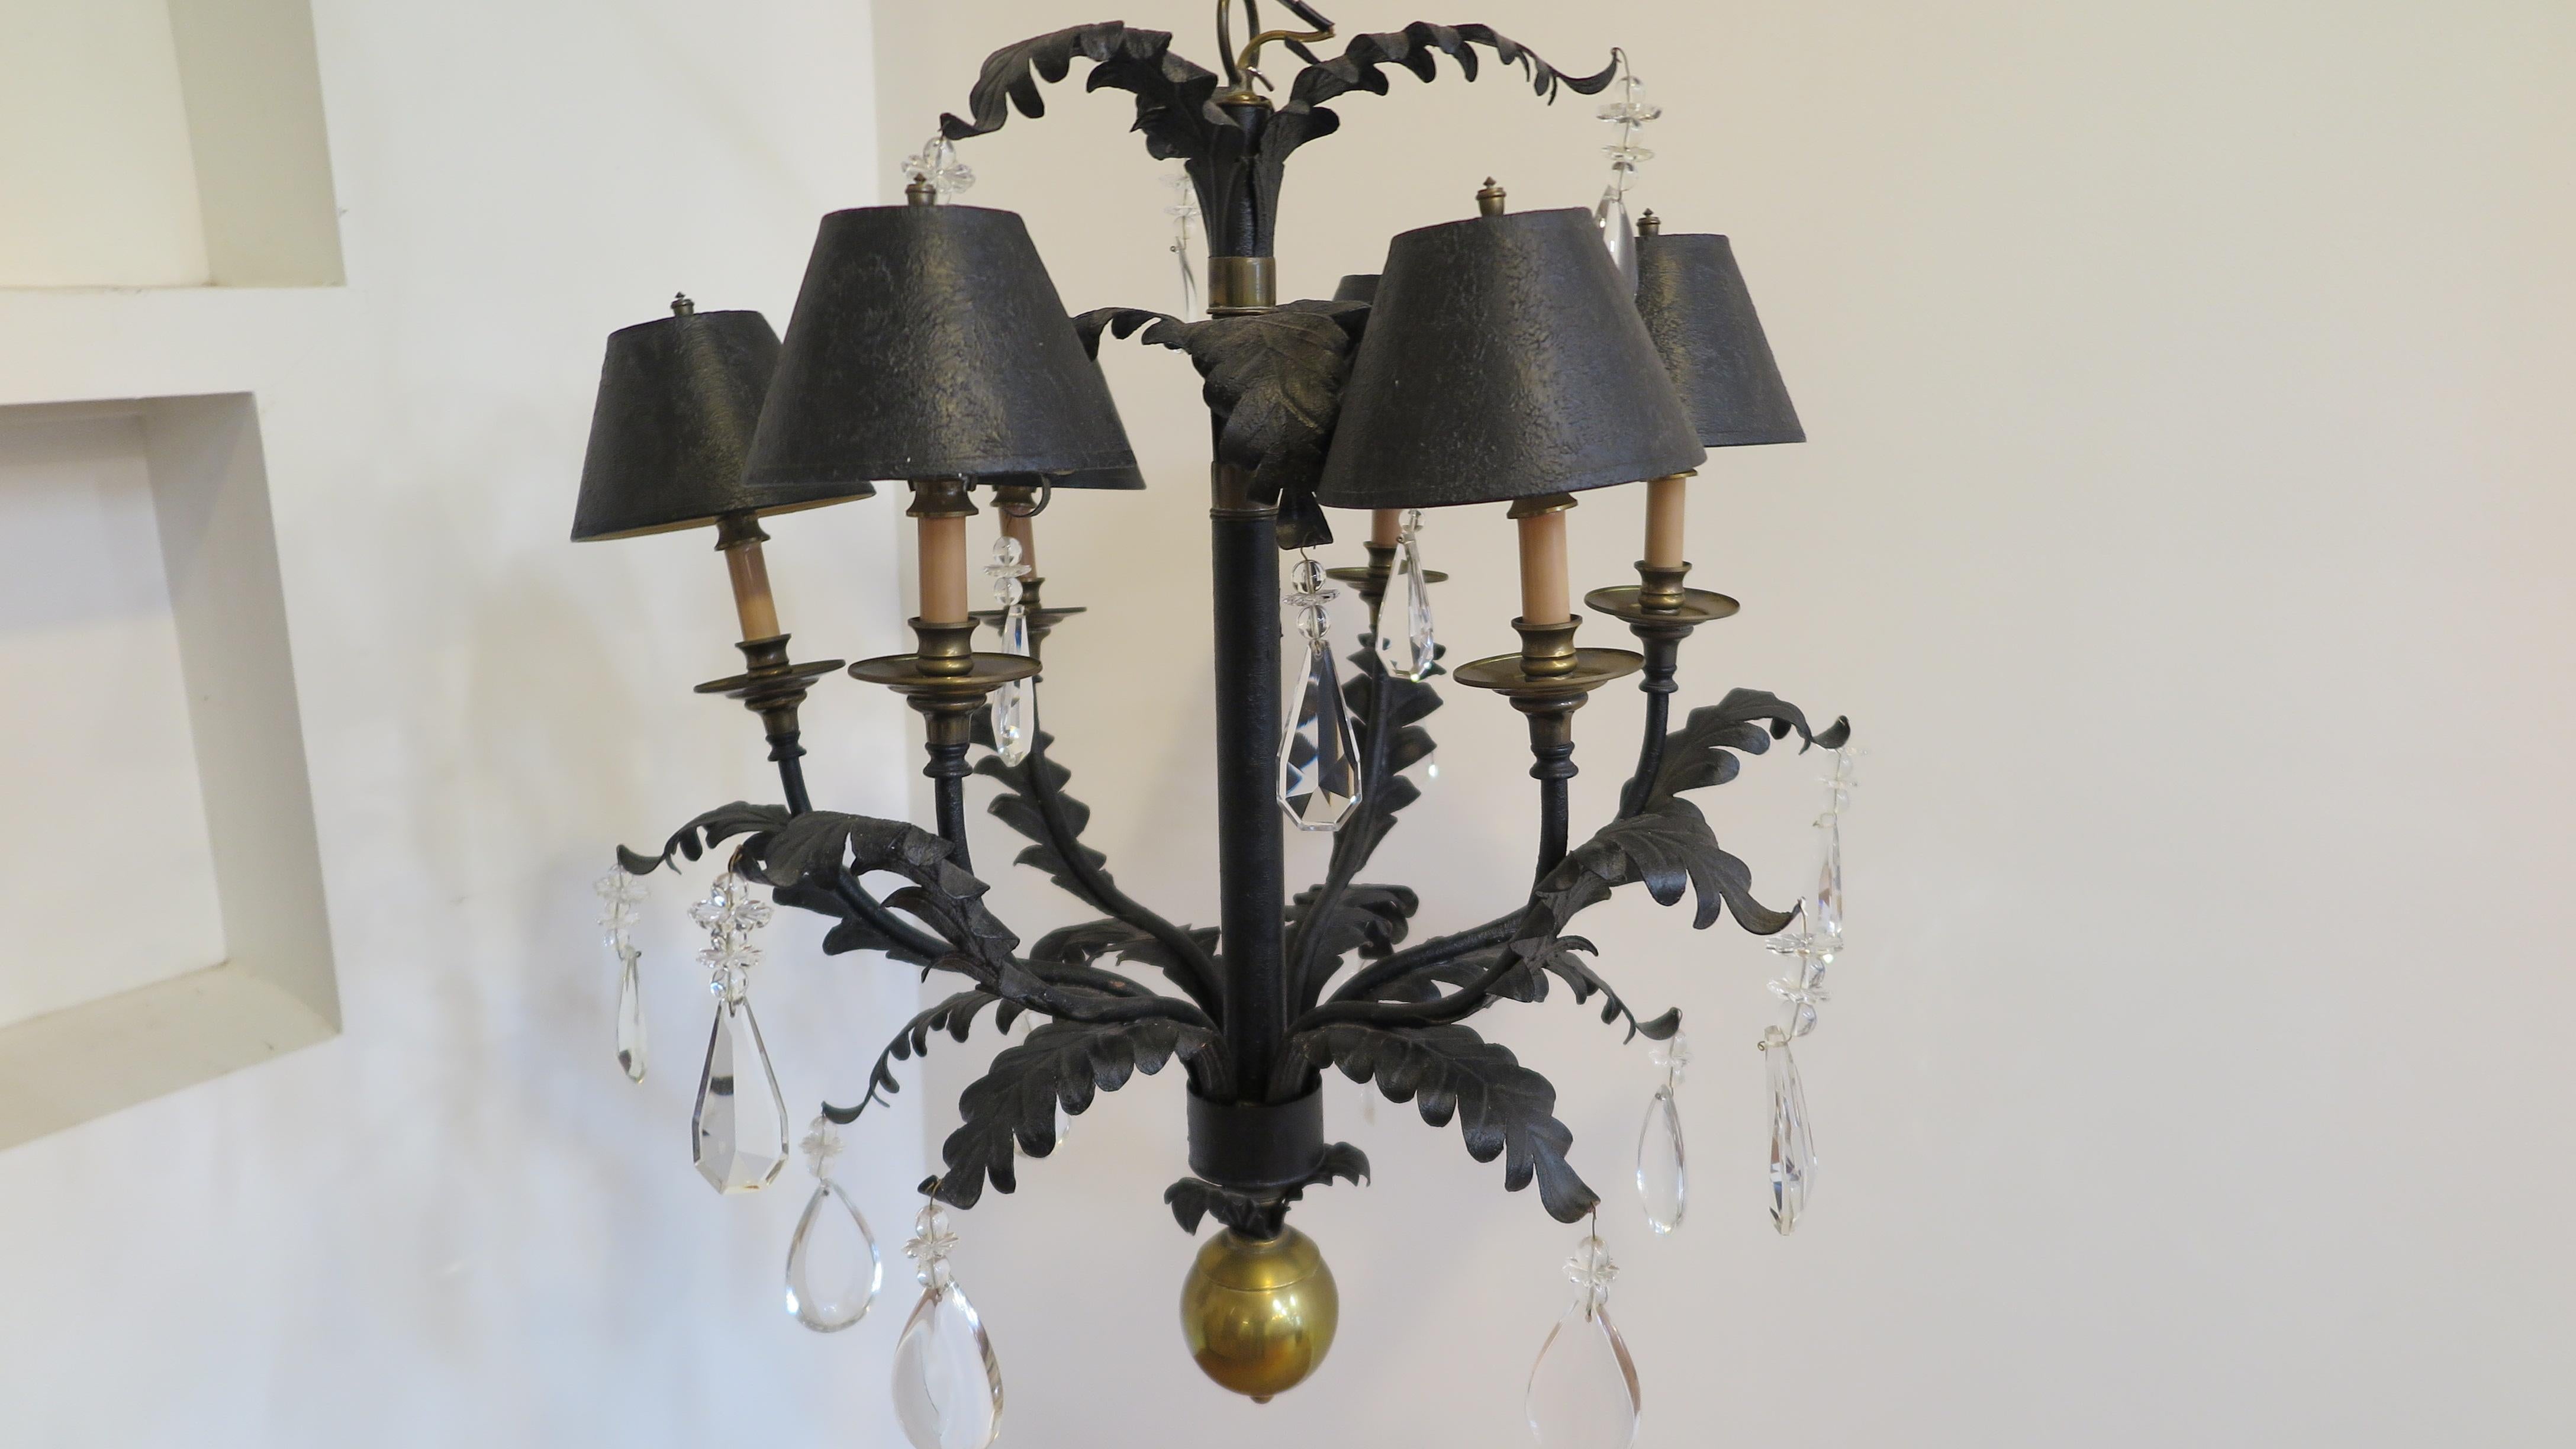 Acanthus Leaf Chandelier Hollywood Regency. Hollywood Regency Chandelier Acanthus leaf motif in black with brass and crystal prism, florets, and ball accent details. Hand formed Acanthus leaves in flowing bends draped in large crystal drops and